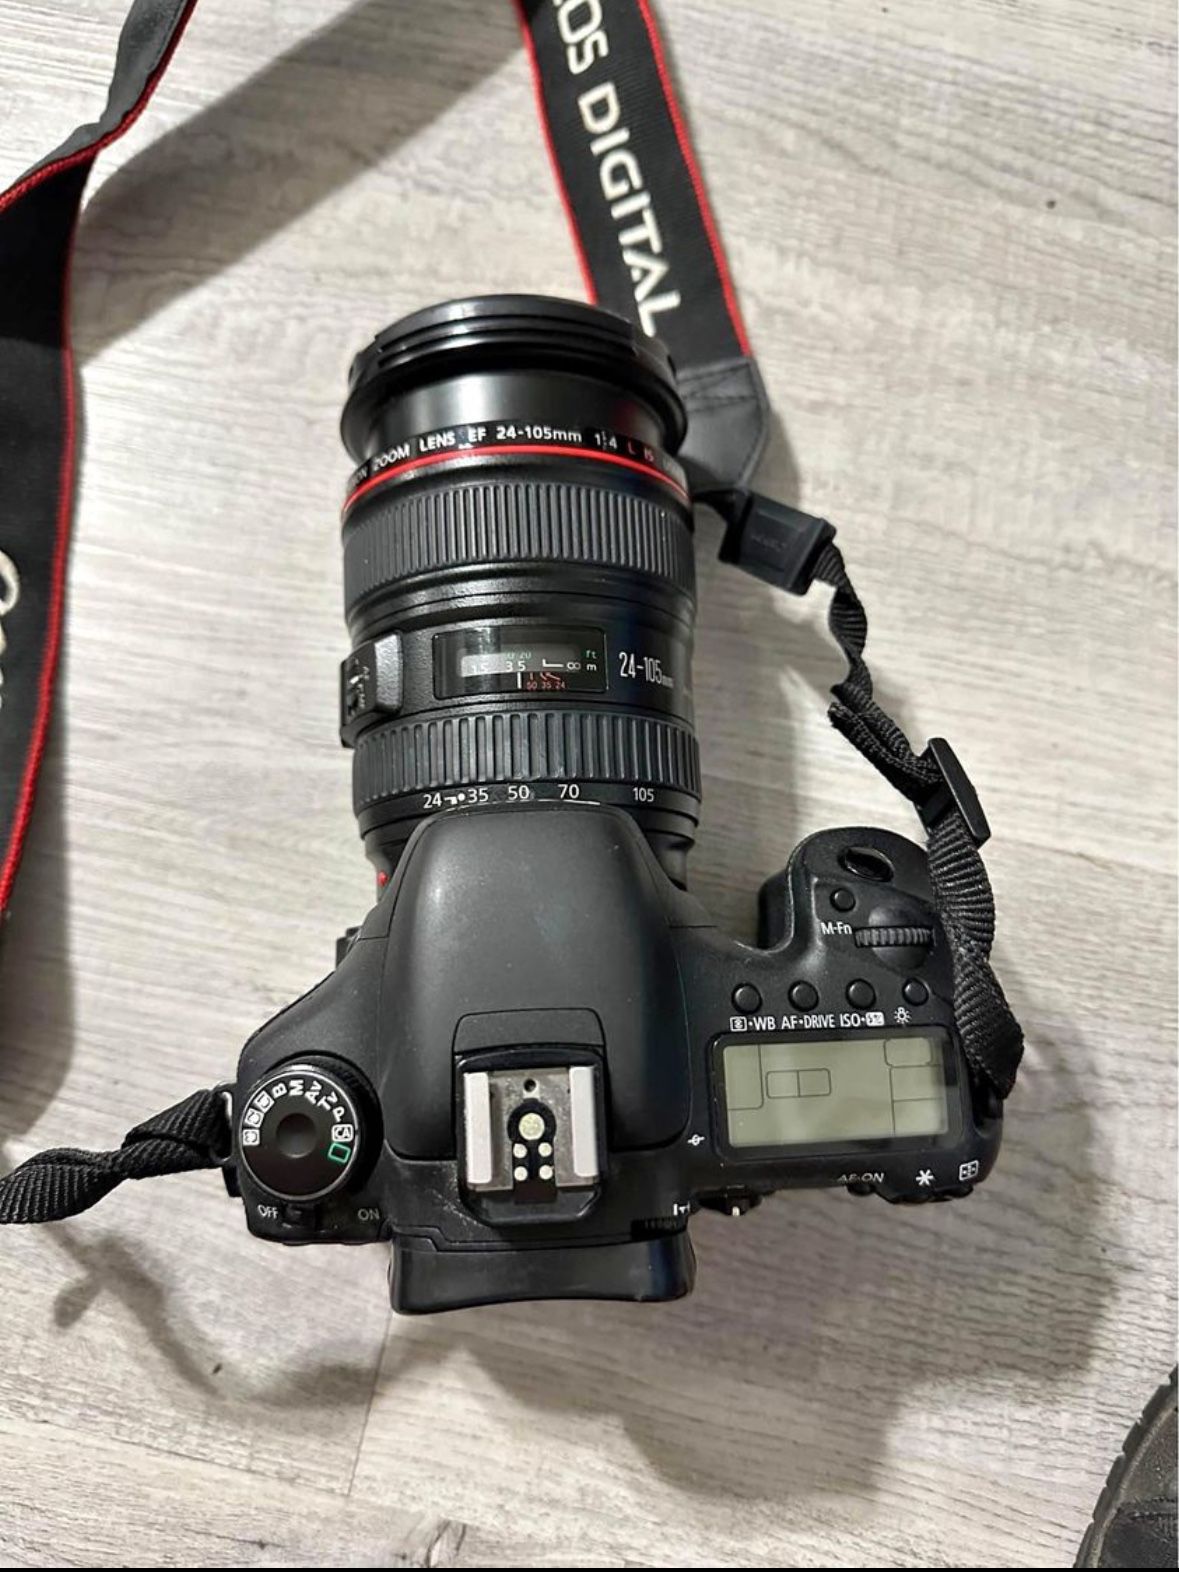 Cannon eos 7D camera and 24-105 lens